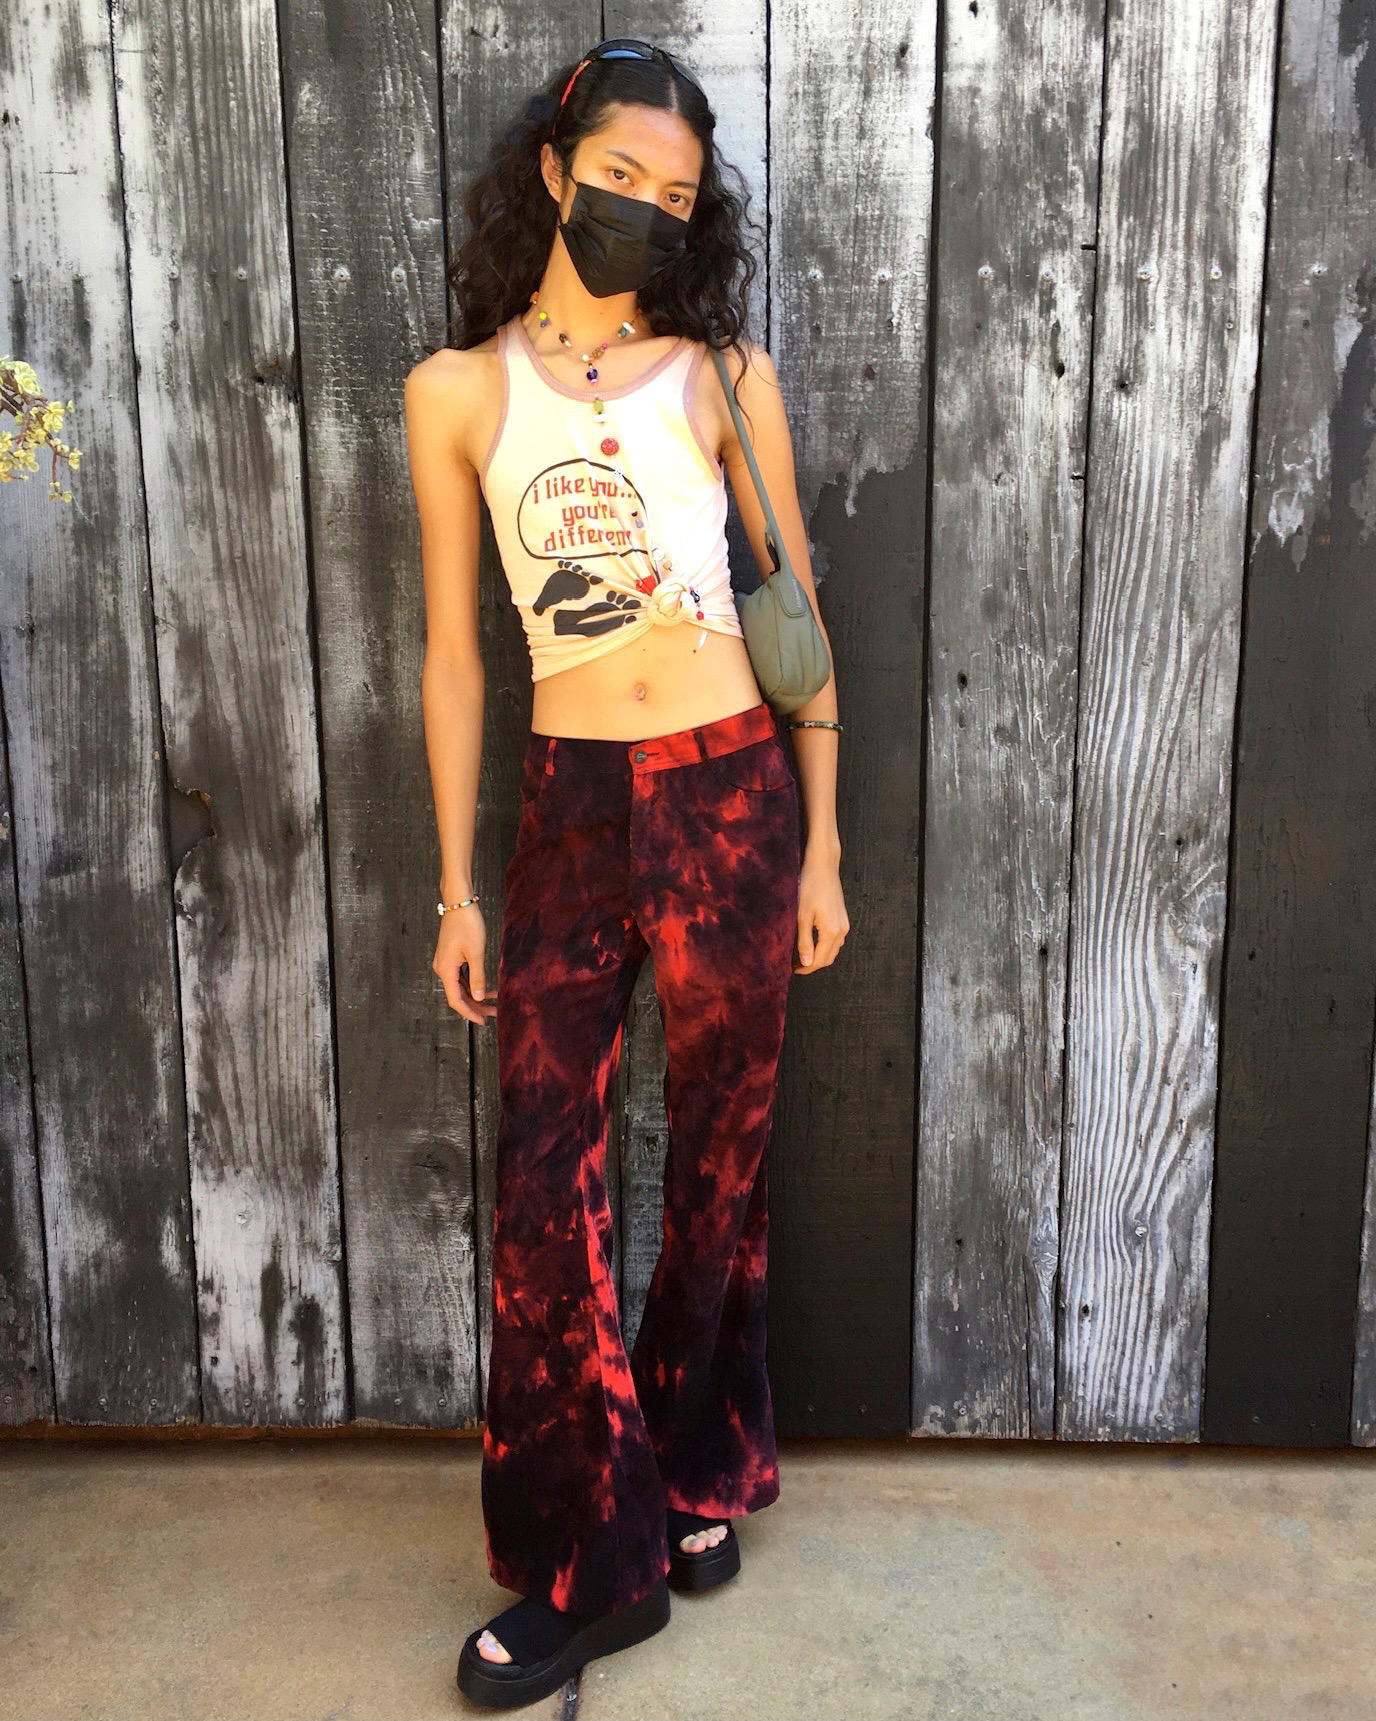 Girl Posing wearing red low-rise pants and a graphic tank top